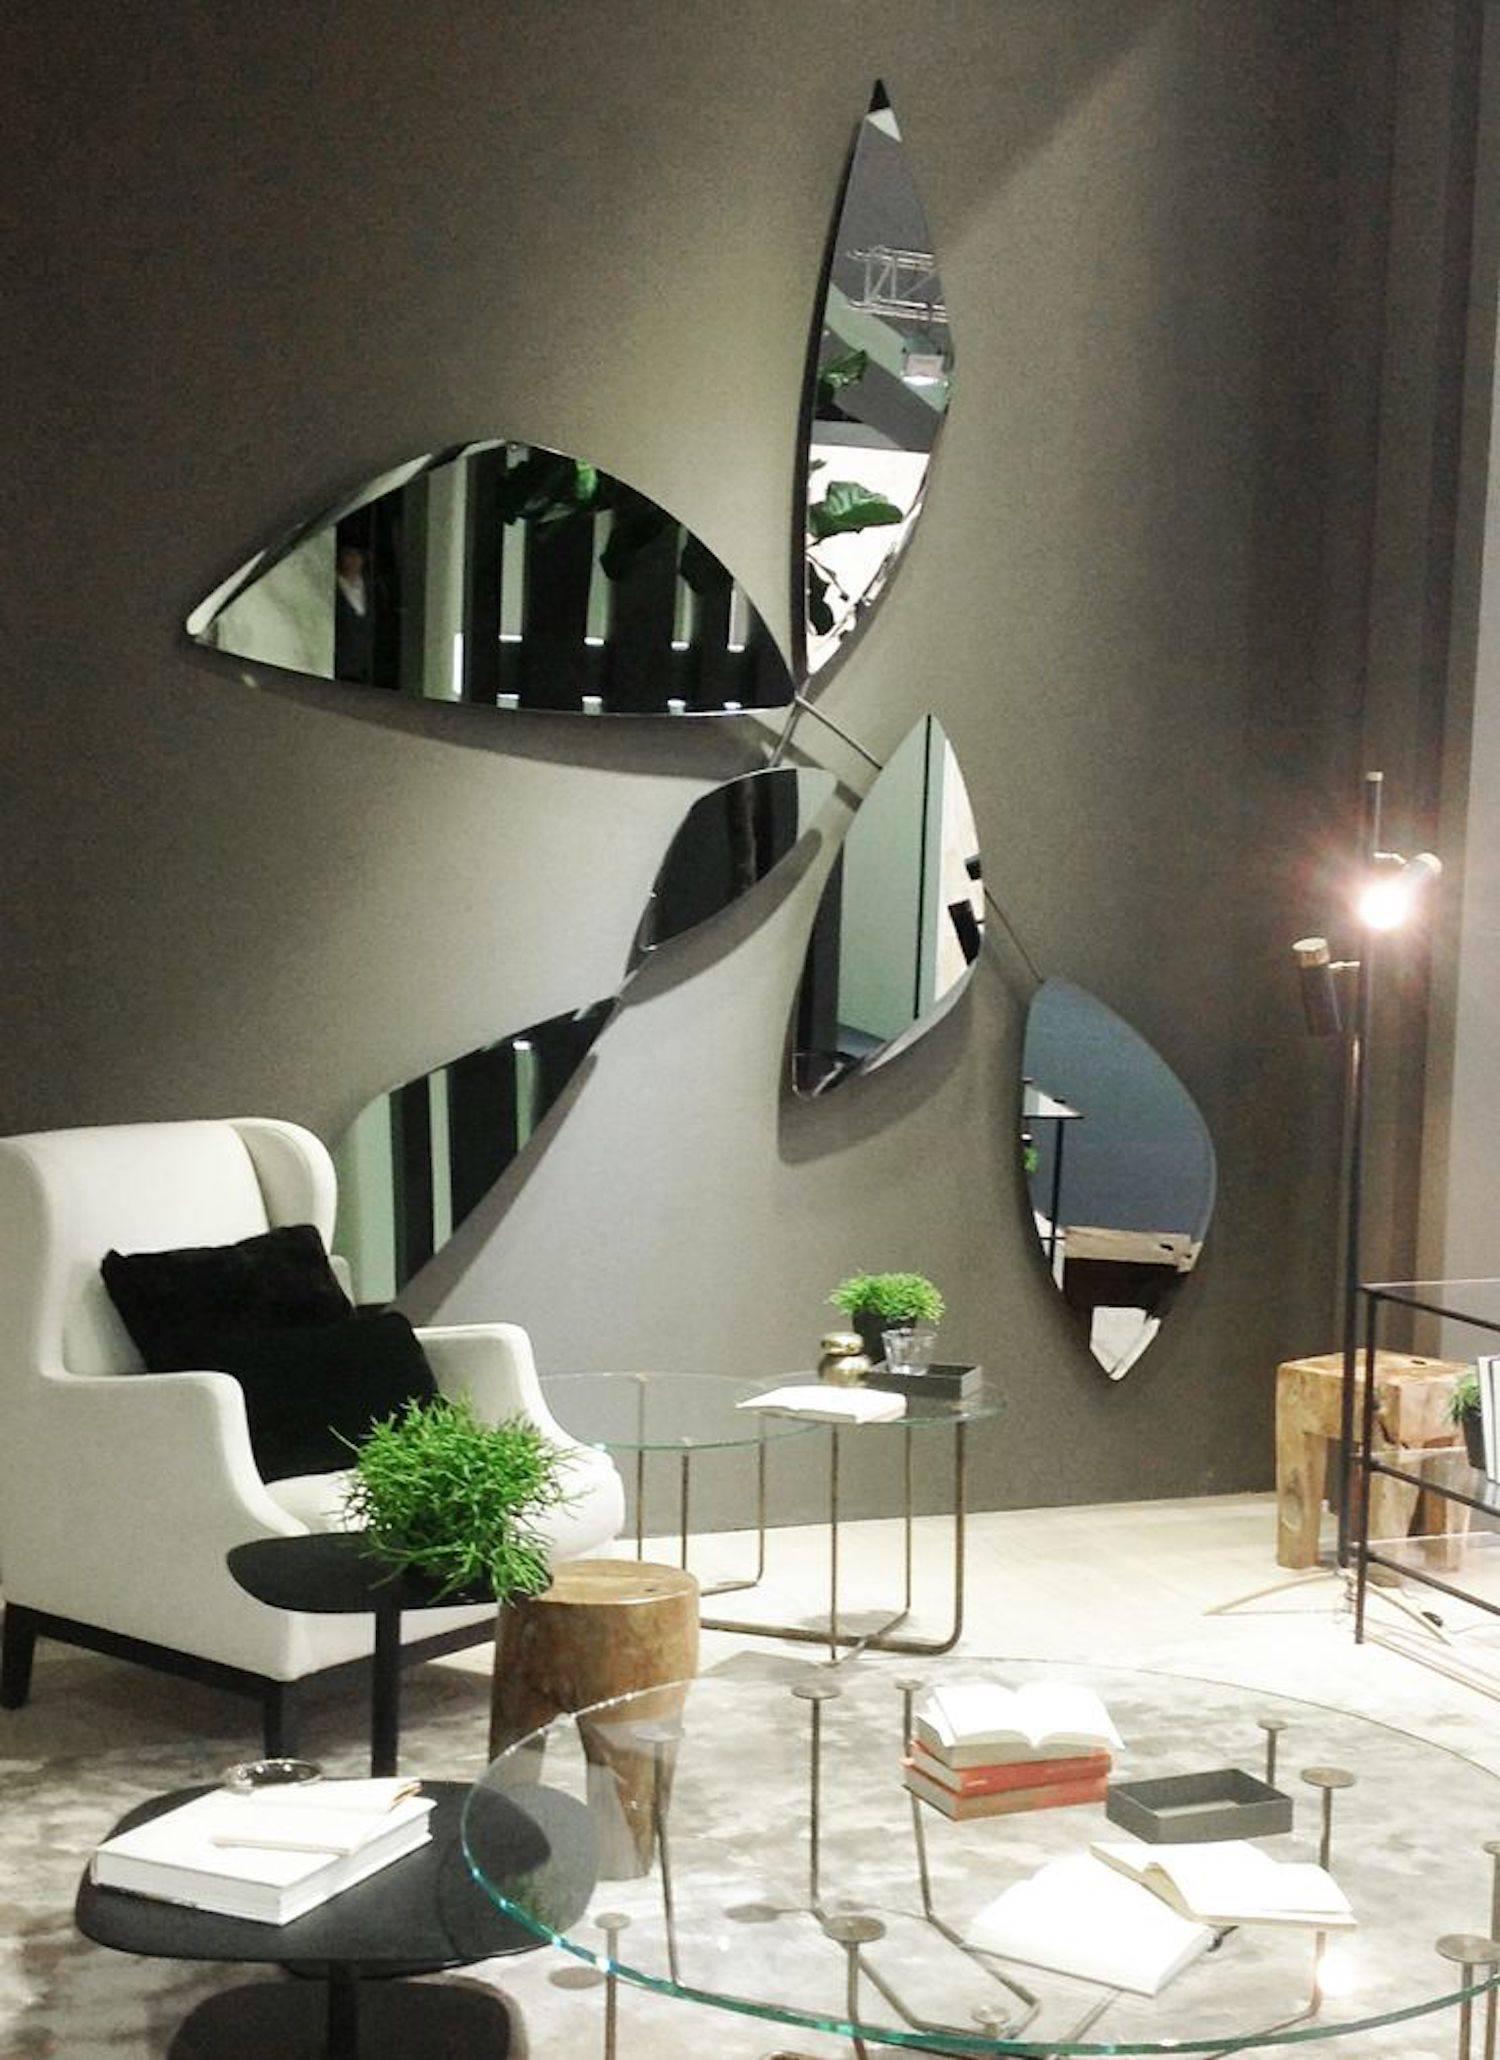 System of extra light or “grigio Italia” smoked bevelled mirrors fixed on panels on different tilts. Available in single panes or as per standard compositions. 

Chromed or burnished metal joint structure.

Sizes in cm:

Composition #1- 215 x